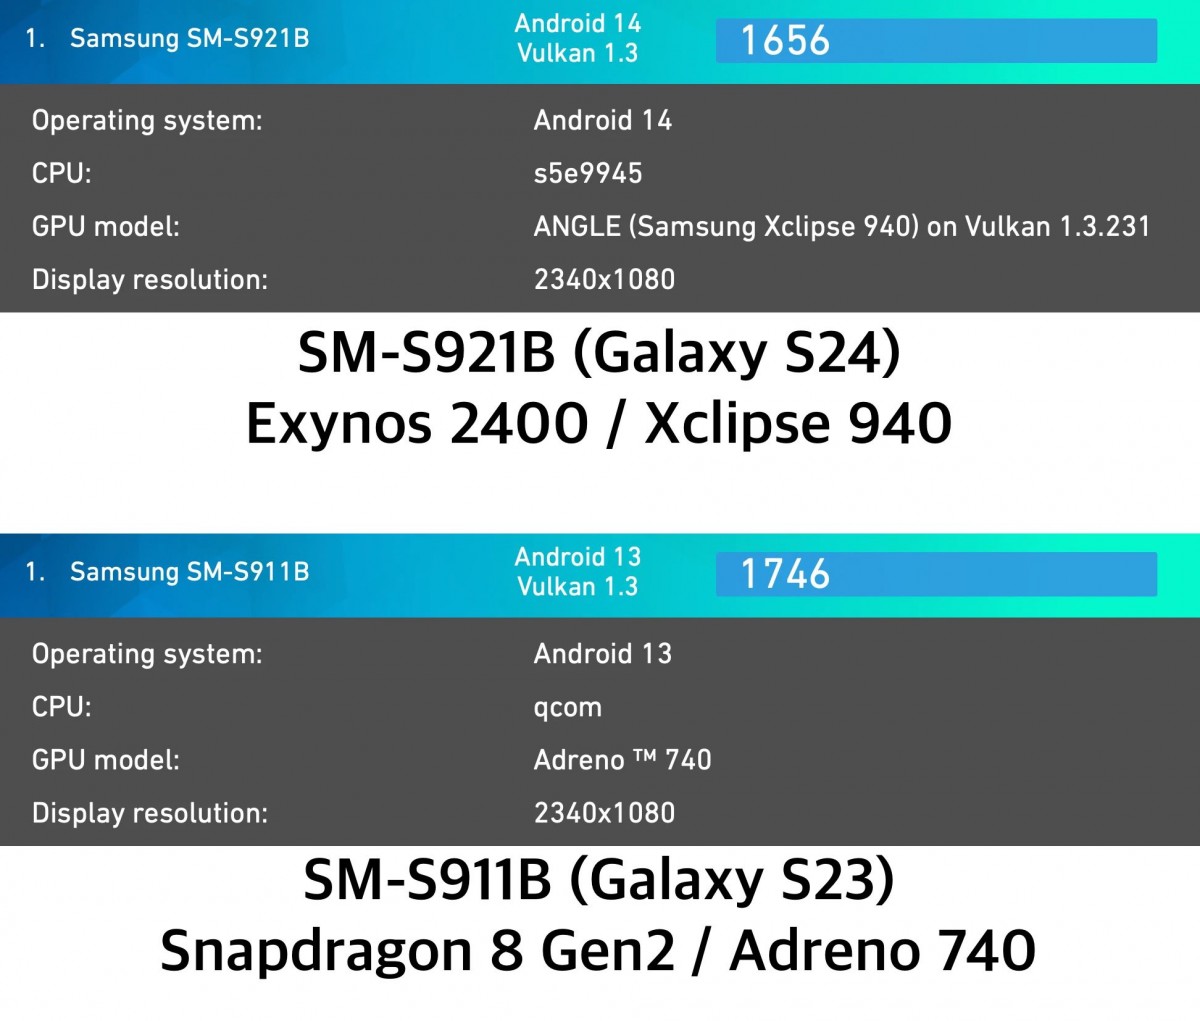 Samsung's Exynos 2400 SoC performance and key specs surface